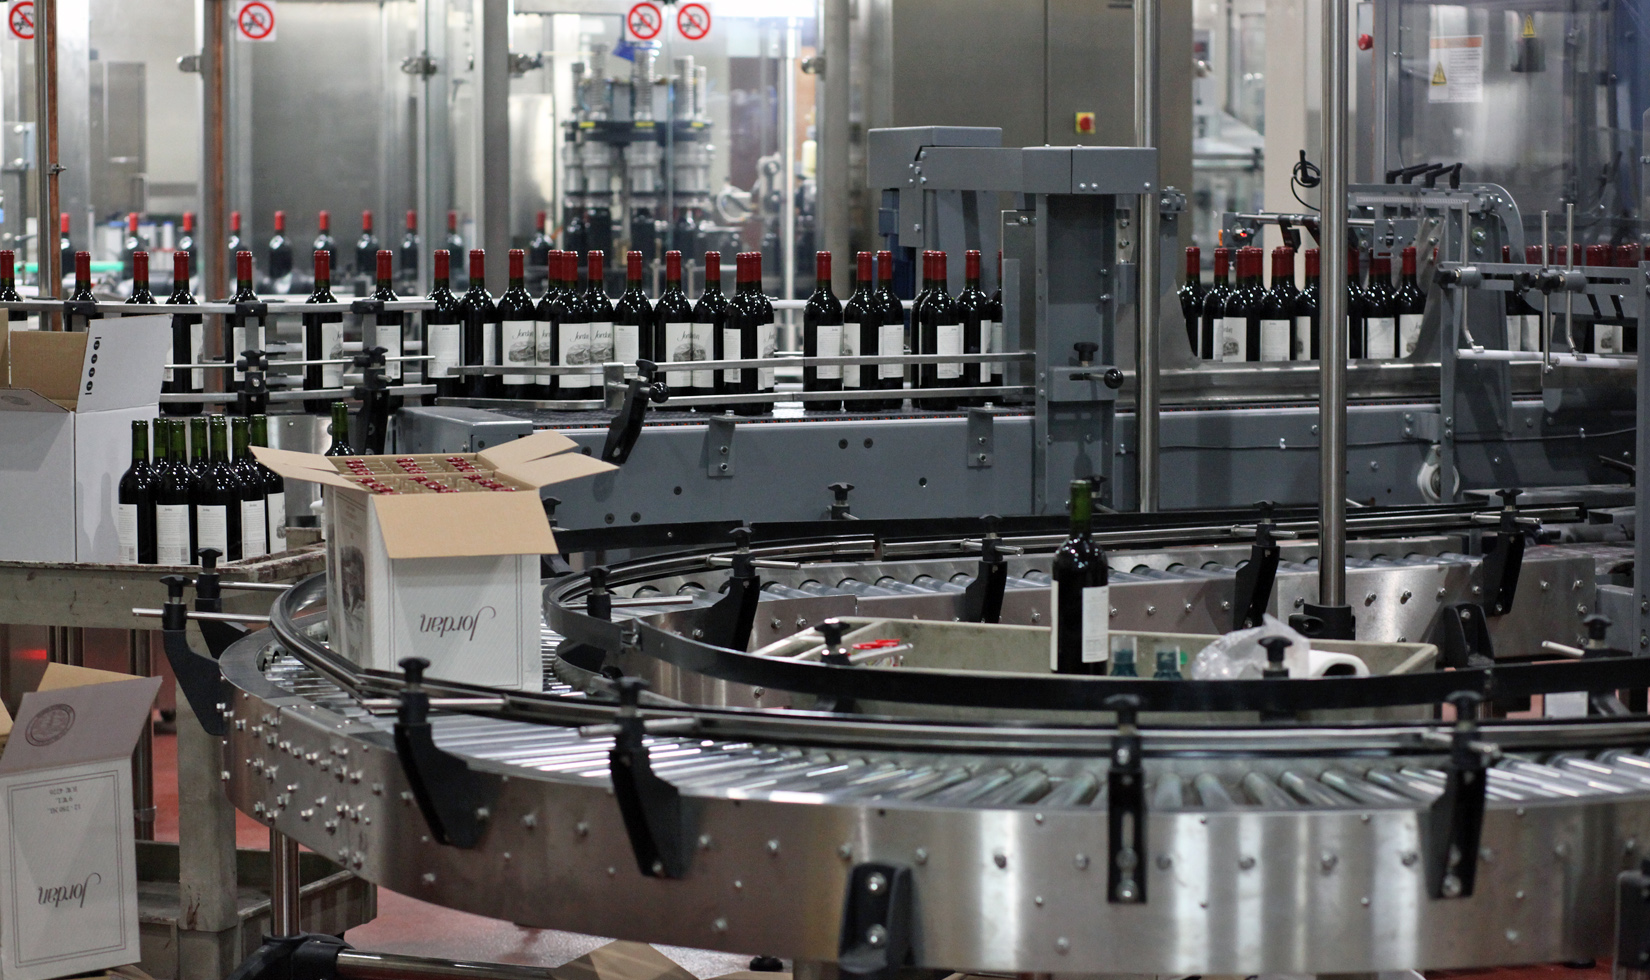 A freshly packed case of red wine goes down the conveyor as bottles line up in the background.